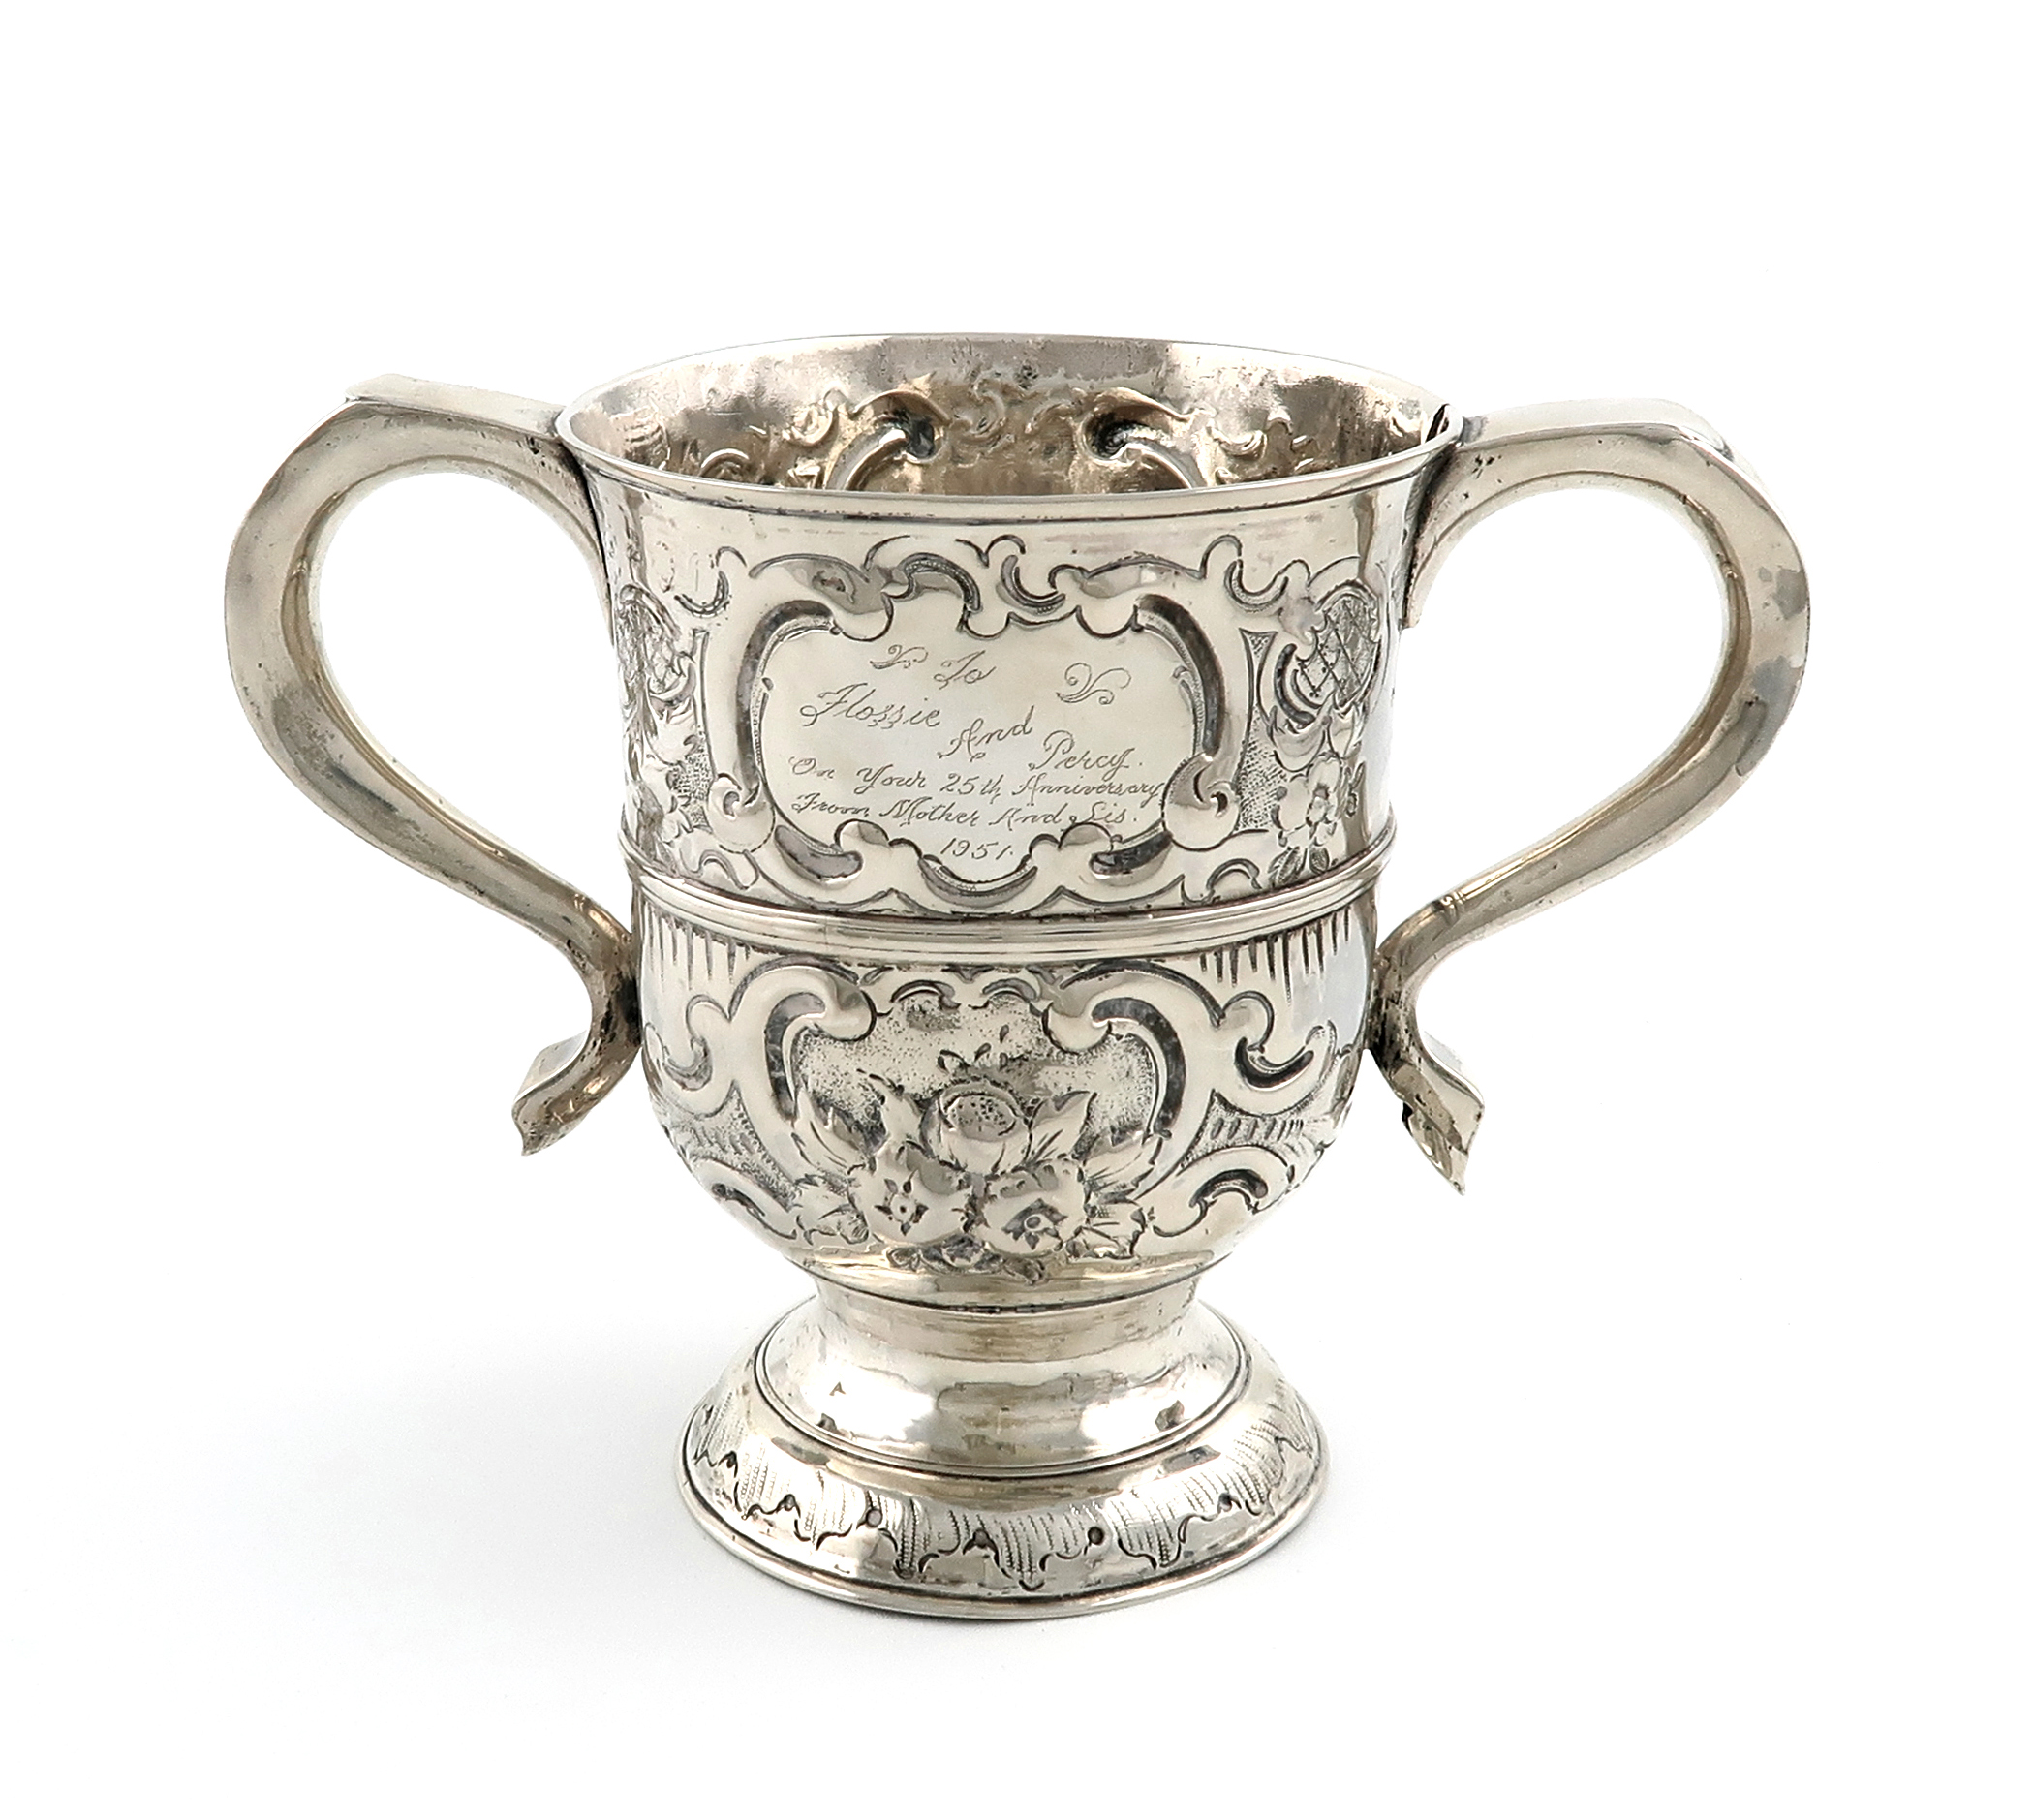 A mid 18th century silver two-handled cup, maker's mark of George Hindmarsh, London circa 1750,